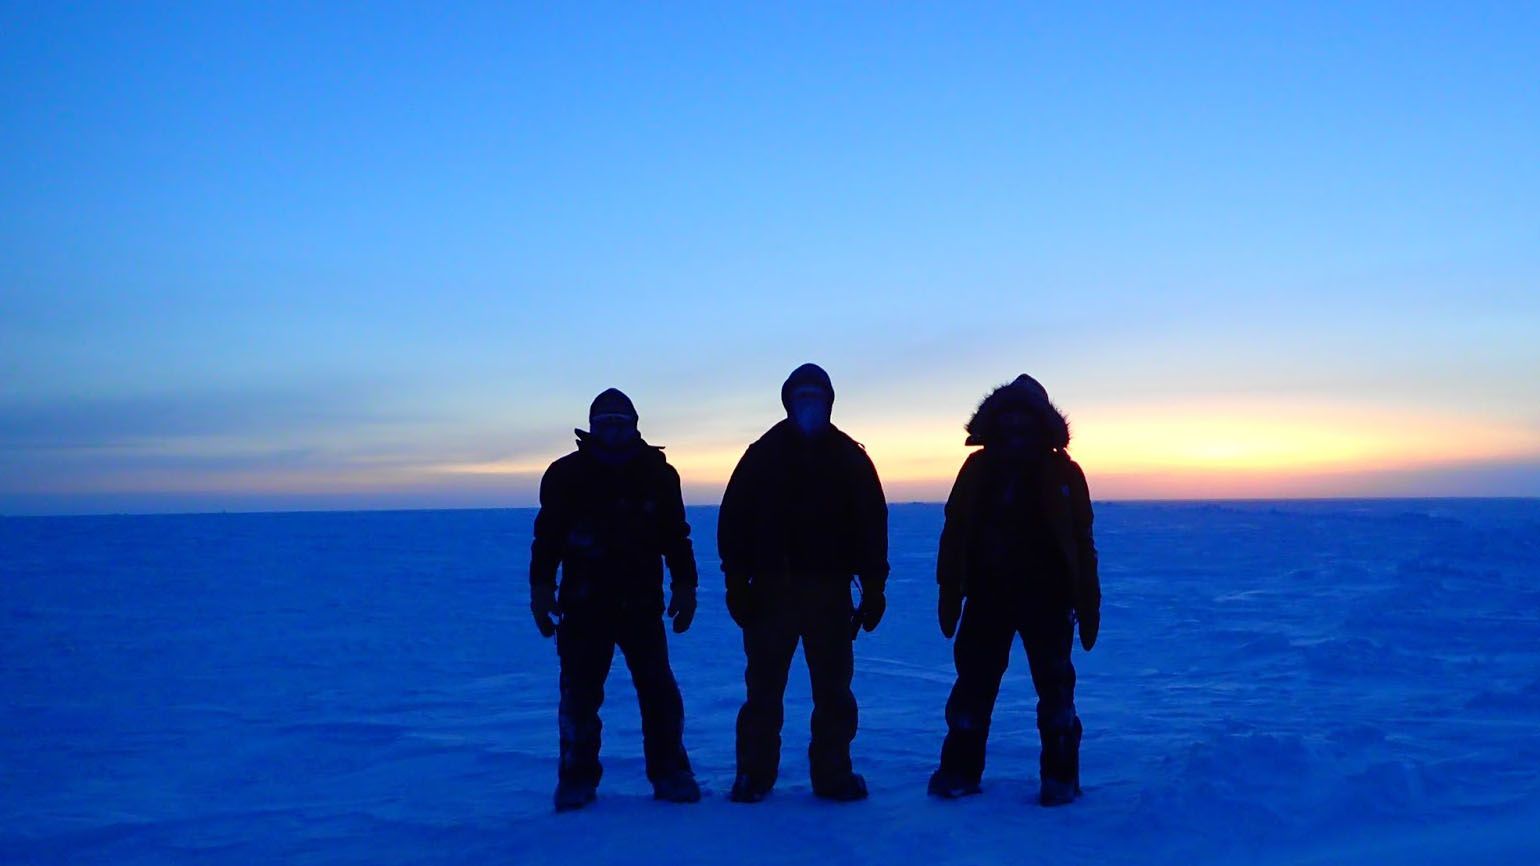 Silhouettes of Brett and his team in the South Pole.